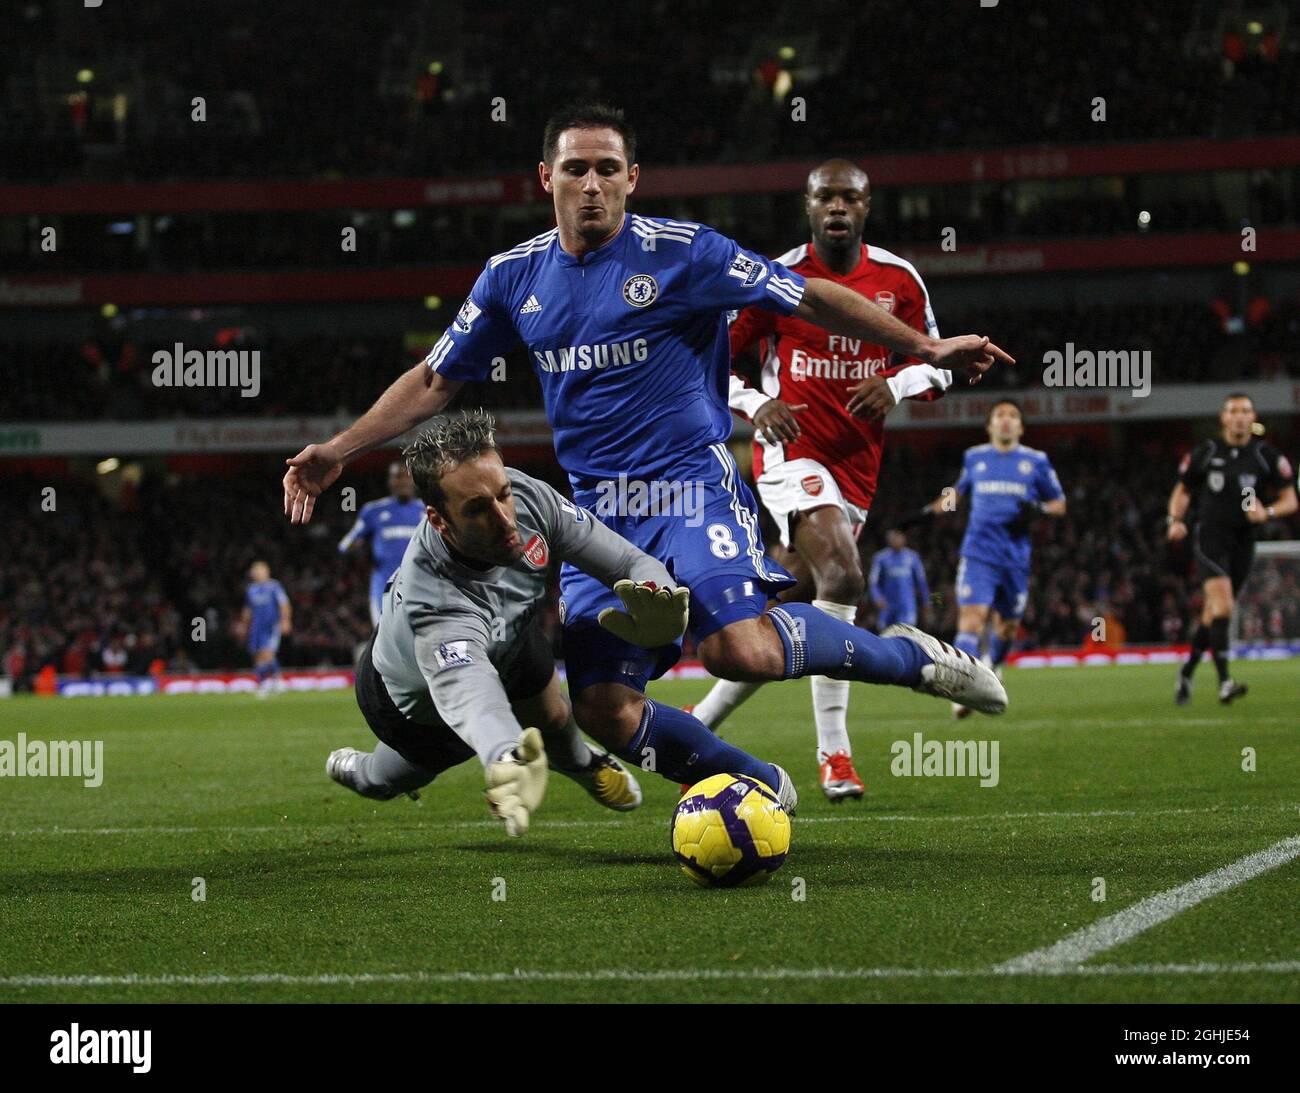 Arsenal's Manuel Almunia tussles with Chelsea's Frank Lampard during the Barclays Premier League match between Arsenal v Chelsea at Emirates Stadium, London. Stock Photo